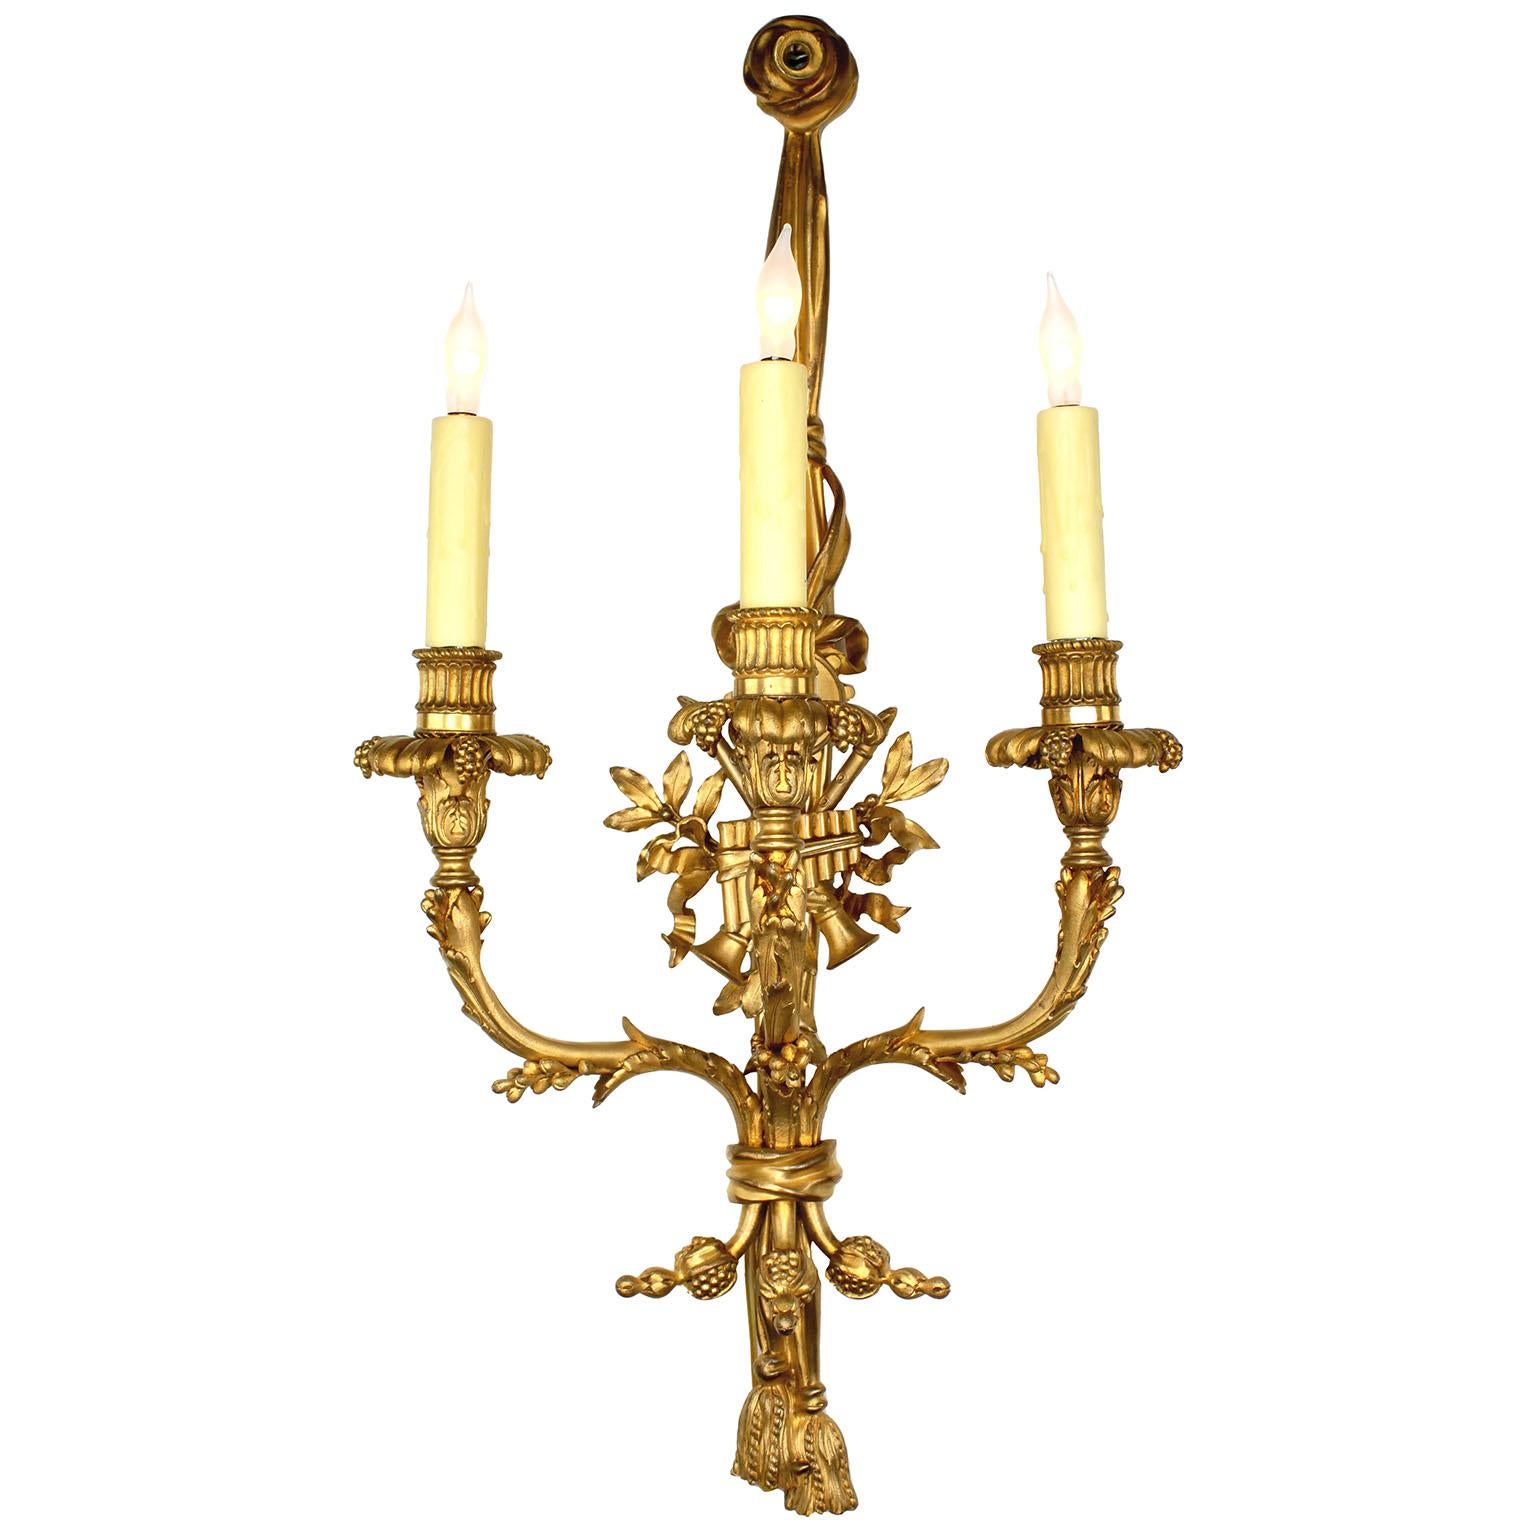 A very fine pair of French 19th Century Louis XV style three-light gilt-bronze wall lights (Sconces), attributed to Henri Dasson (1825–1896). The elongated ormolu tassel body surmounted with a ribbon-tied allegorical shield with musical instruments